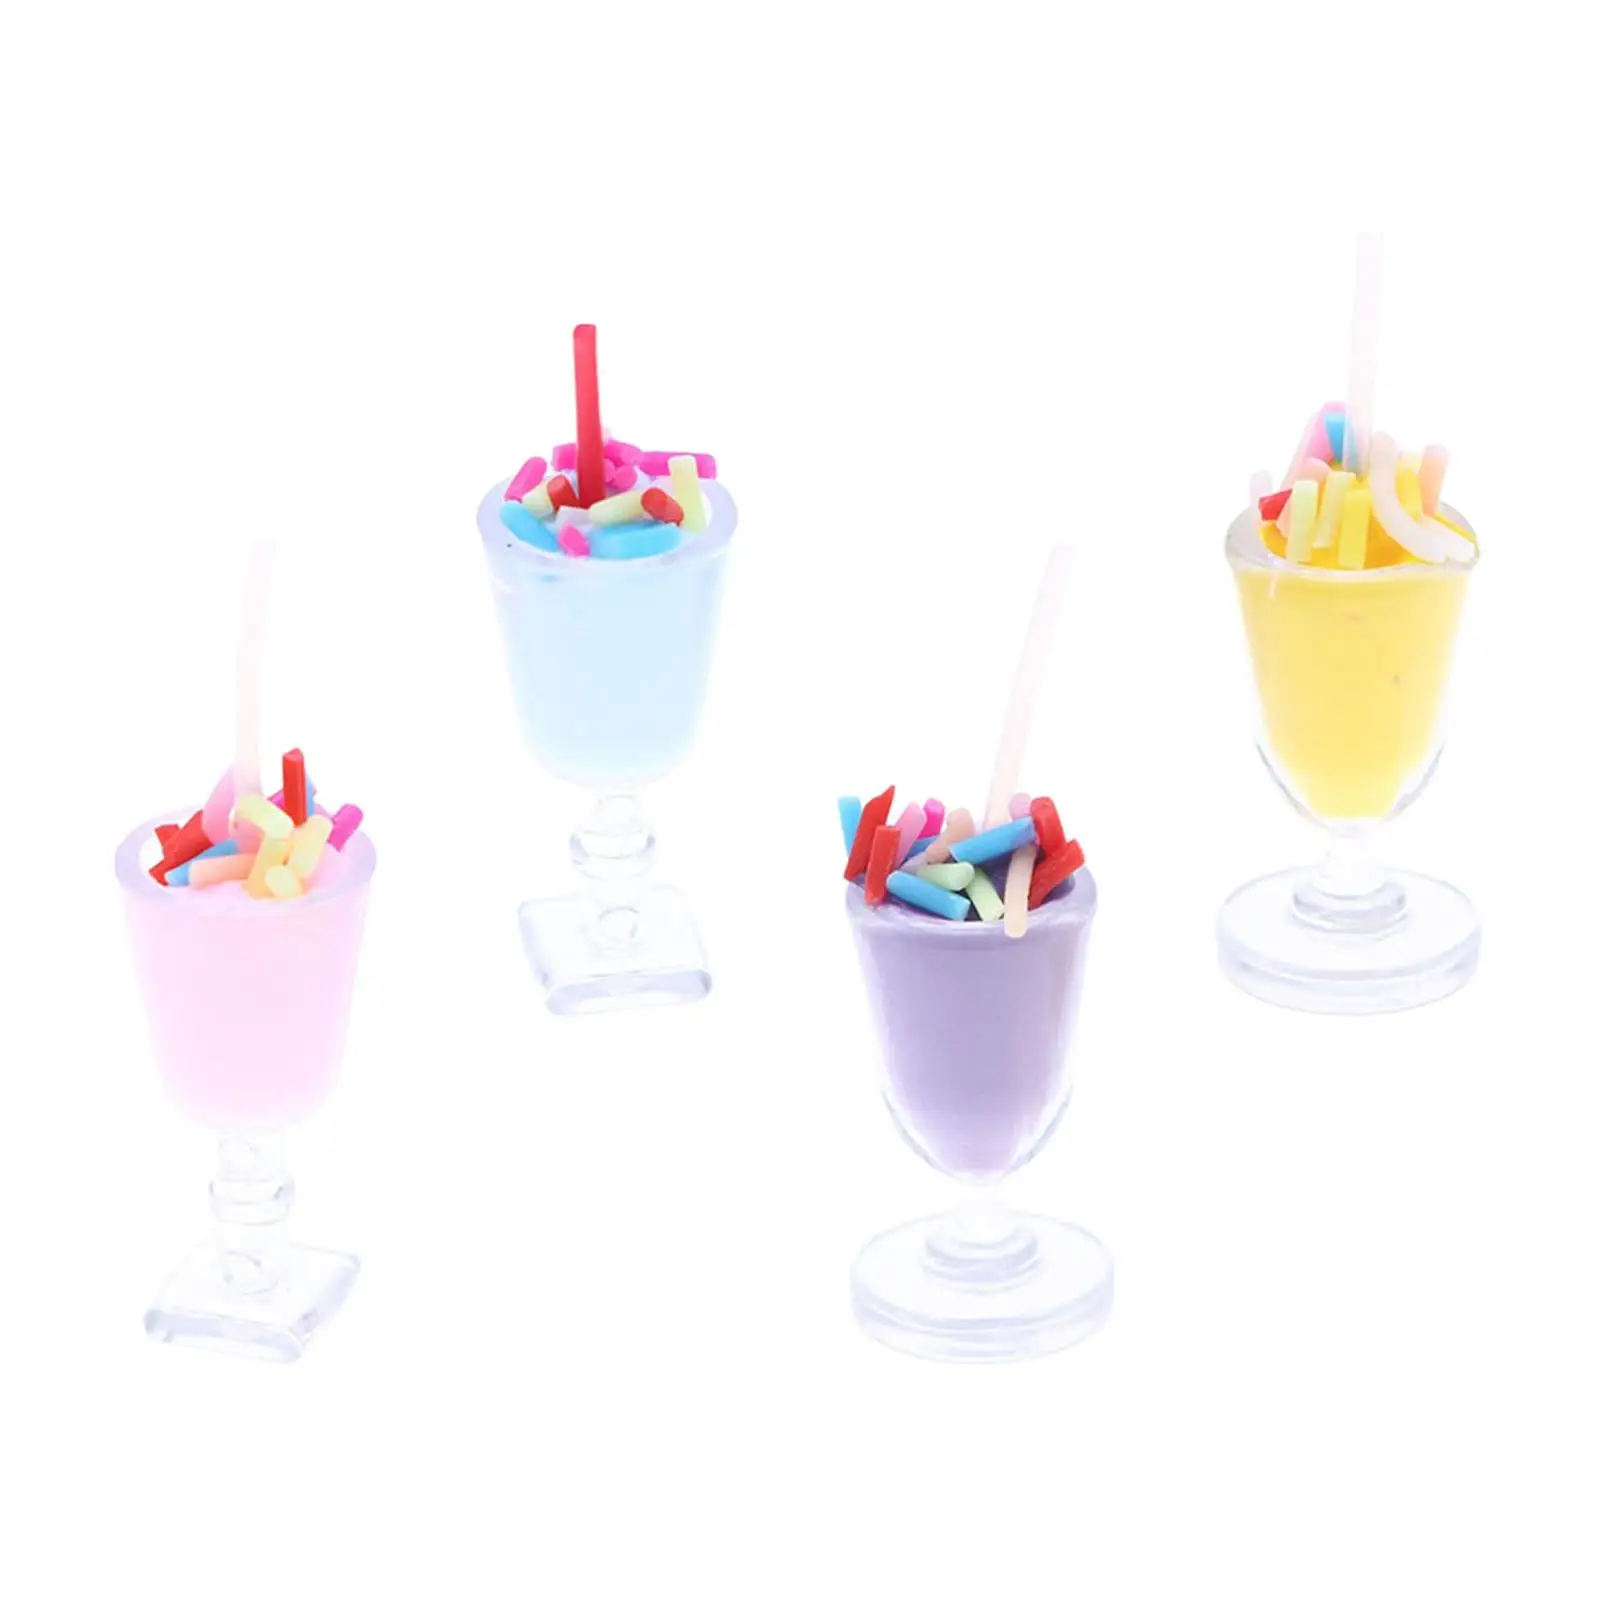 

4 Pieces 1:12 Dollhouse Ice Cream Cup Model Dessert Adornment Toy for Architectural DIY Scenery Sand Table Railway Station